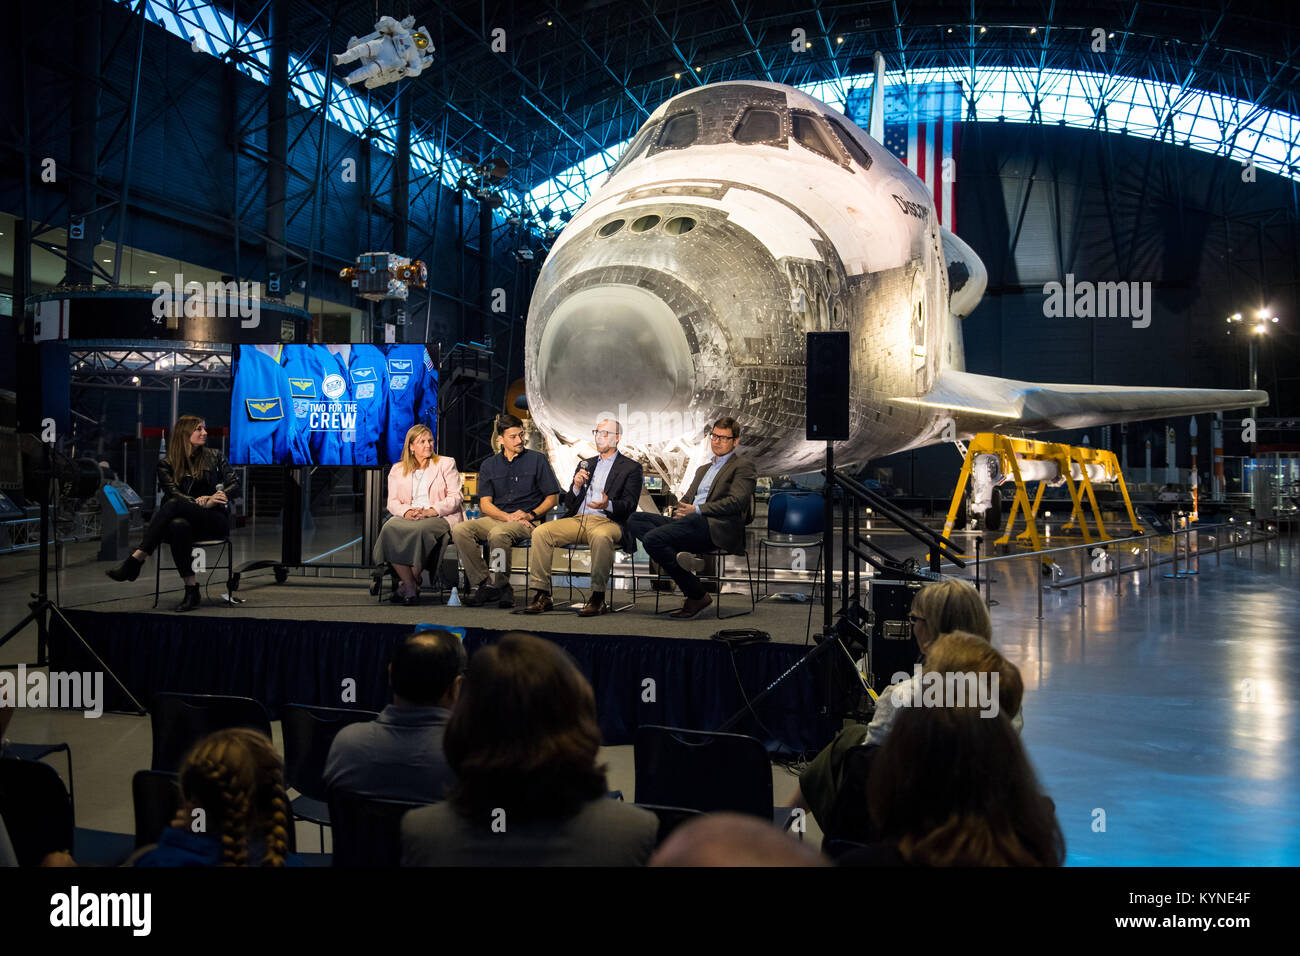 Ryan Heitz, co-founder and head of school, Ideaventions Academy, second from right, speaks on a panel on &quot;igniting NOVA K-12 engineering and maker education&quot;, at a pop-up makerspace hosted by Future Engineers with support from NASA and The American Society of Mechanical Engineers (ASME), at the Steven F. Udvar-Hazy Center, Thursday, September 21, 2017 in Chantilly, Virginia. Participants were able to create digital 3D models using Autodesk Tinkercad and watch objects being printed with Makerbot 3D printers. Photo Credit: (NASA/Aubrey Gemignani) Stock Photo